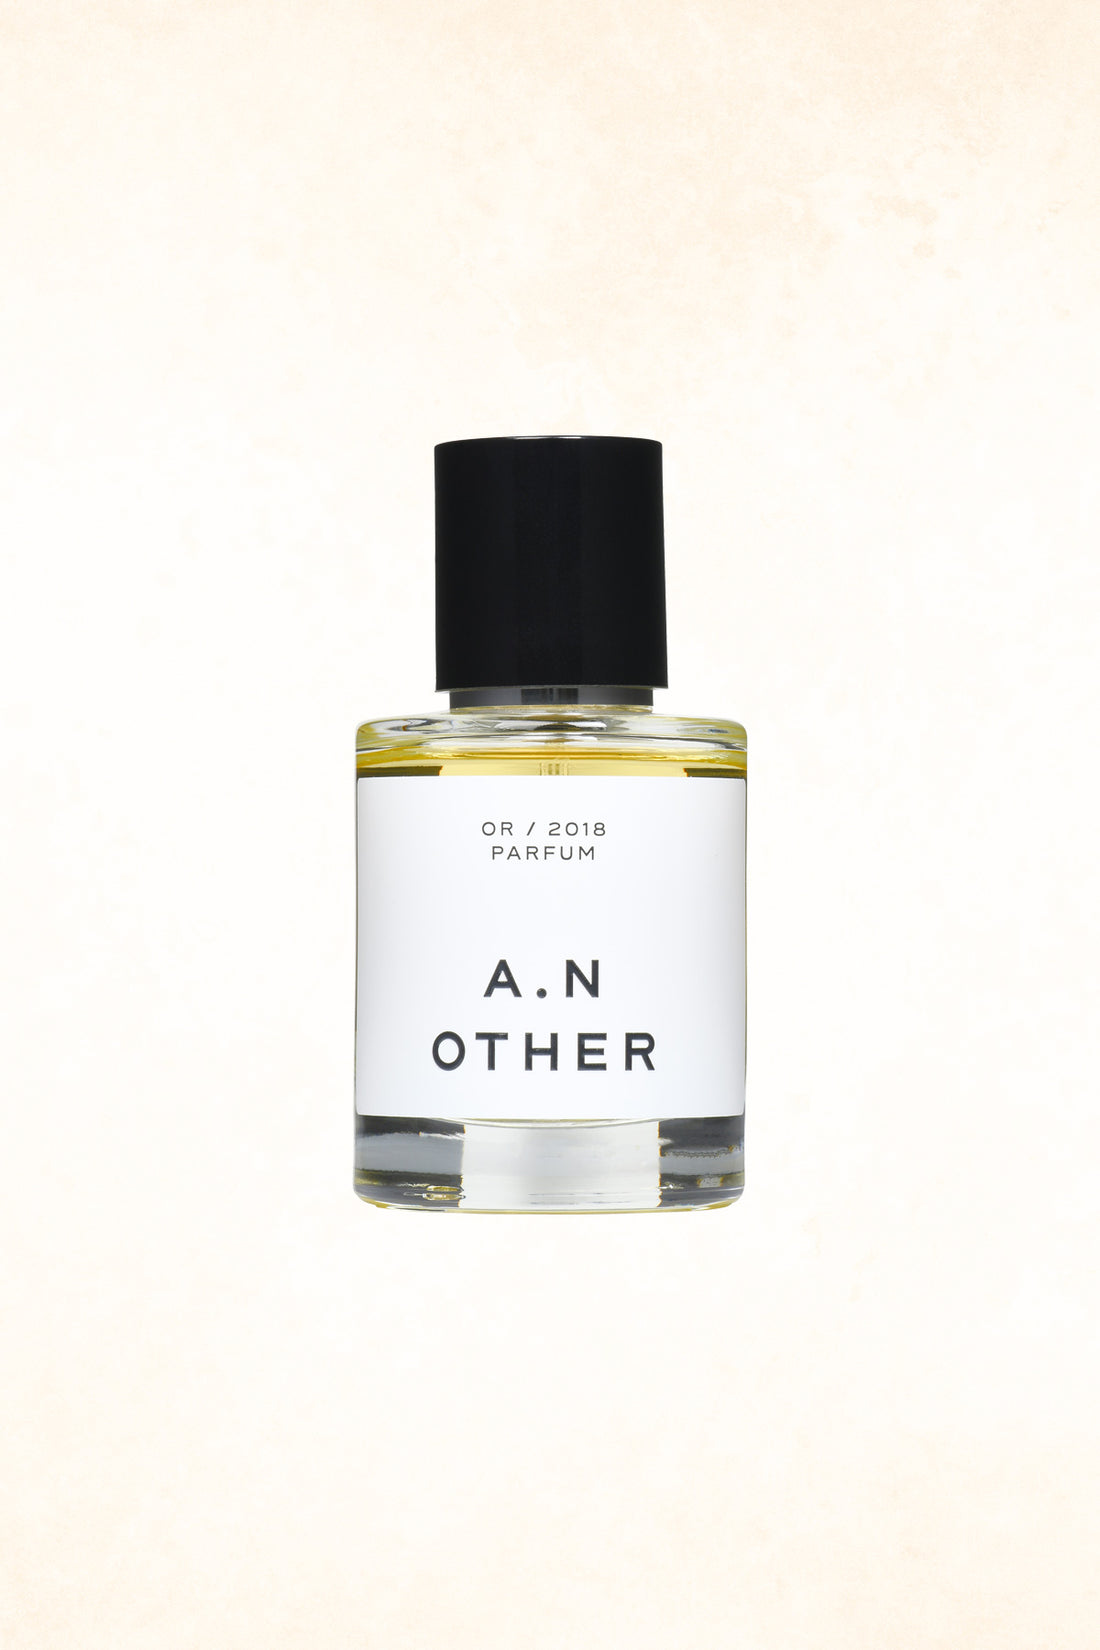 A.N OTHER – OR/2018 Parfum - 50 ml